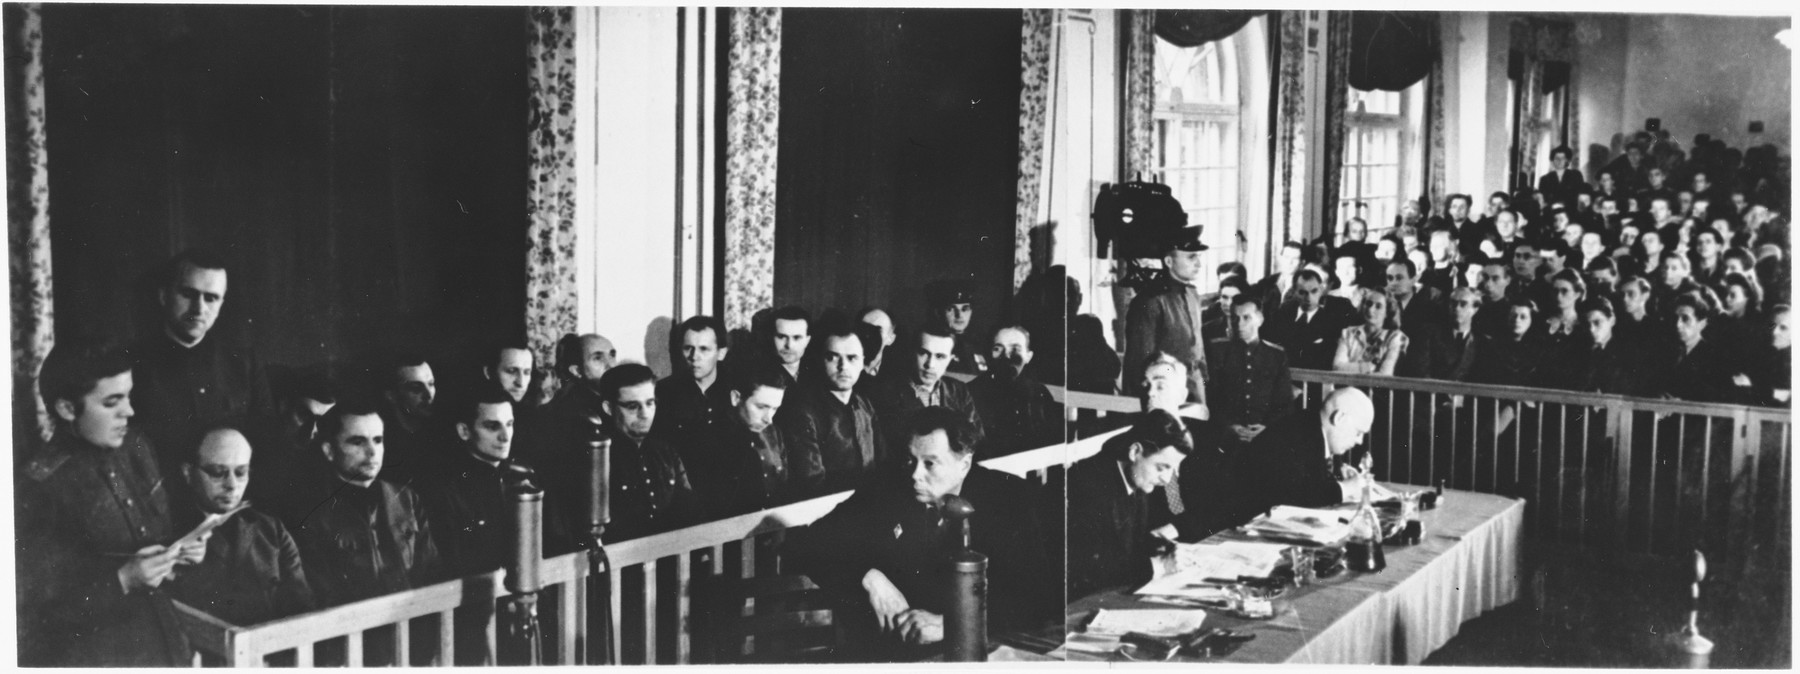 View of the courtroom at the Sachsenhausen concentration camp war crimes trial in Berlin.

The defendants are pictured at the left, their lawyers in the middle, and spectators at the right.